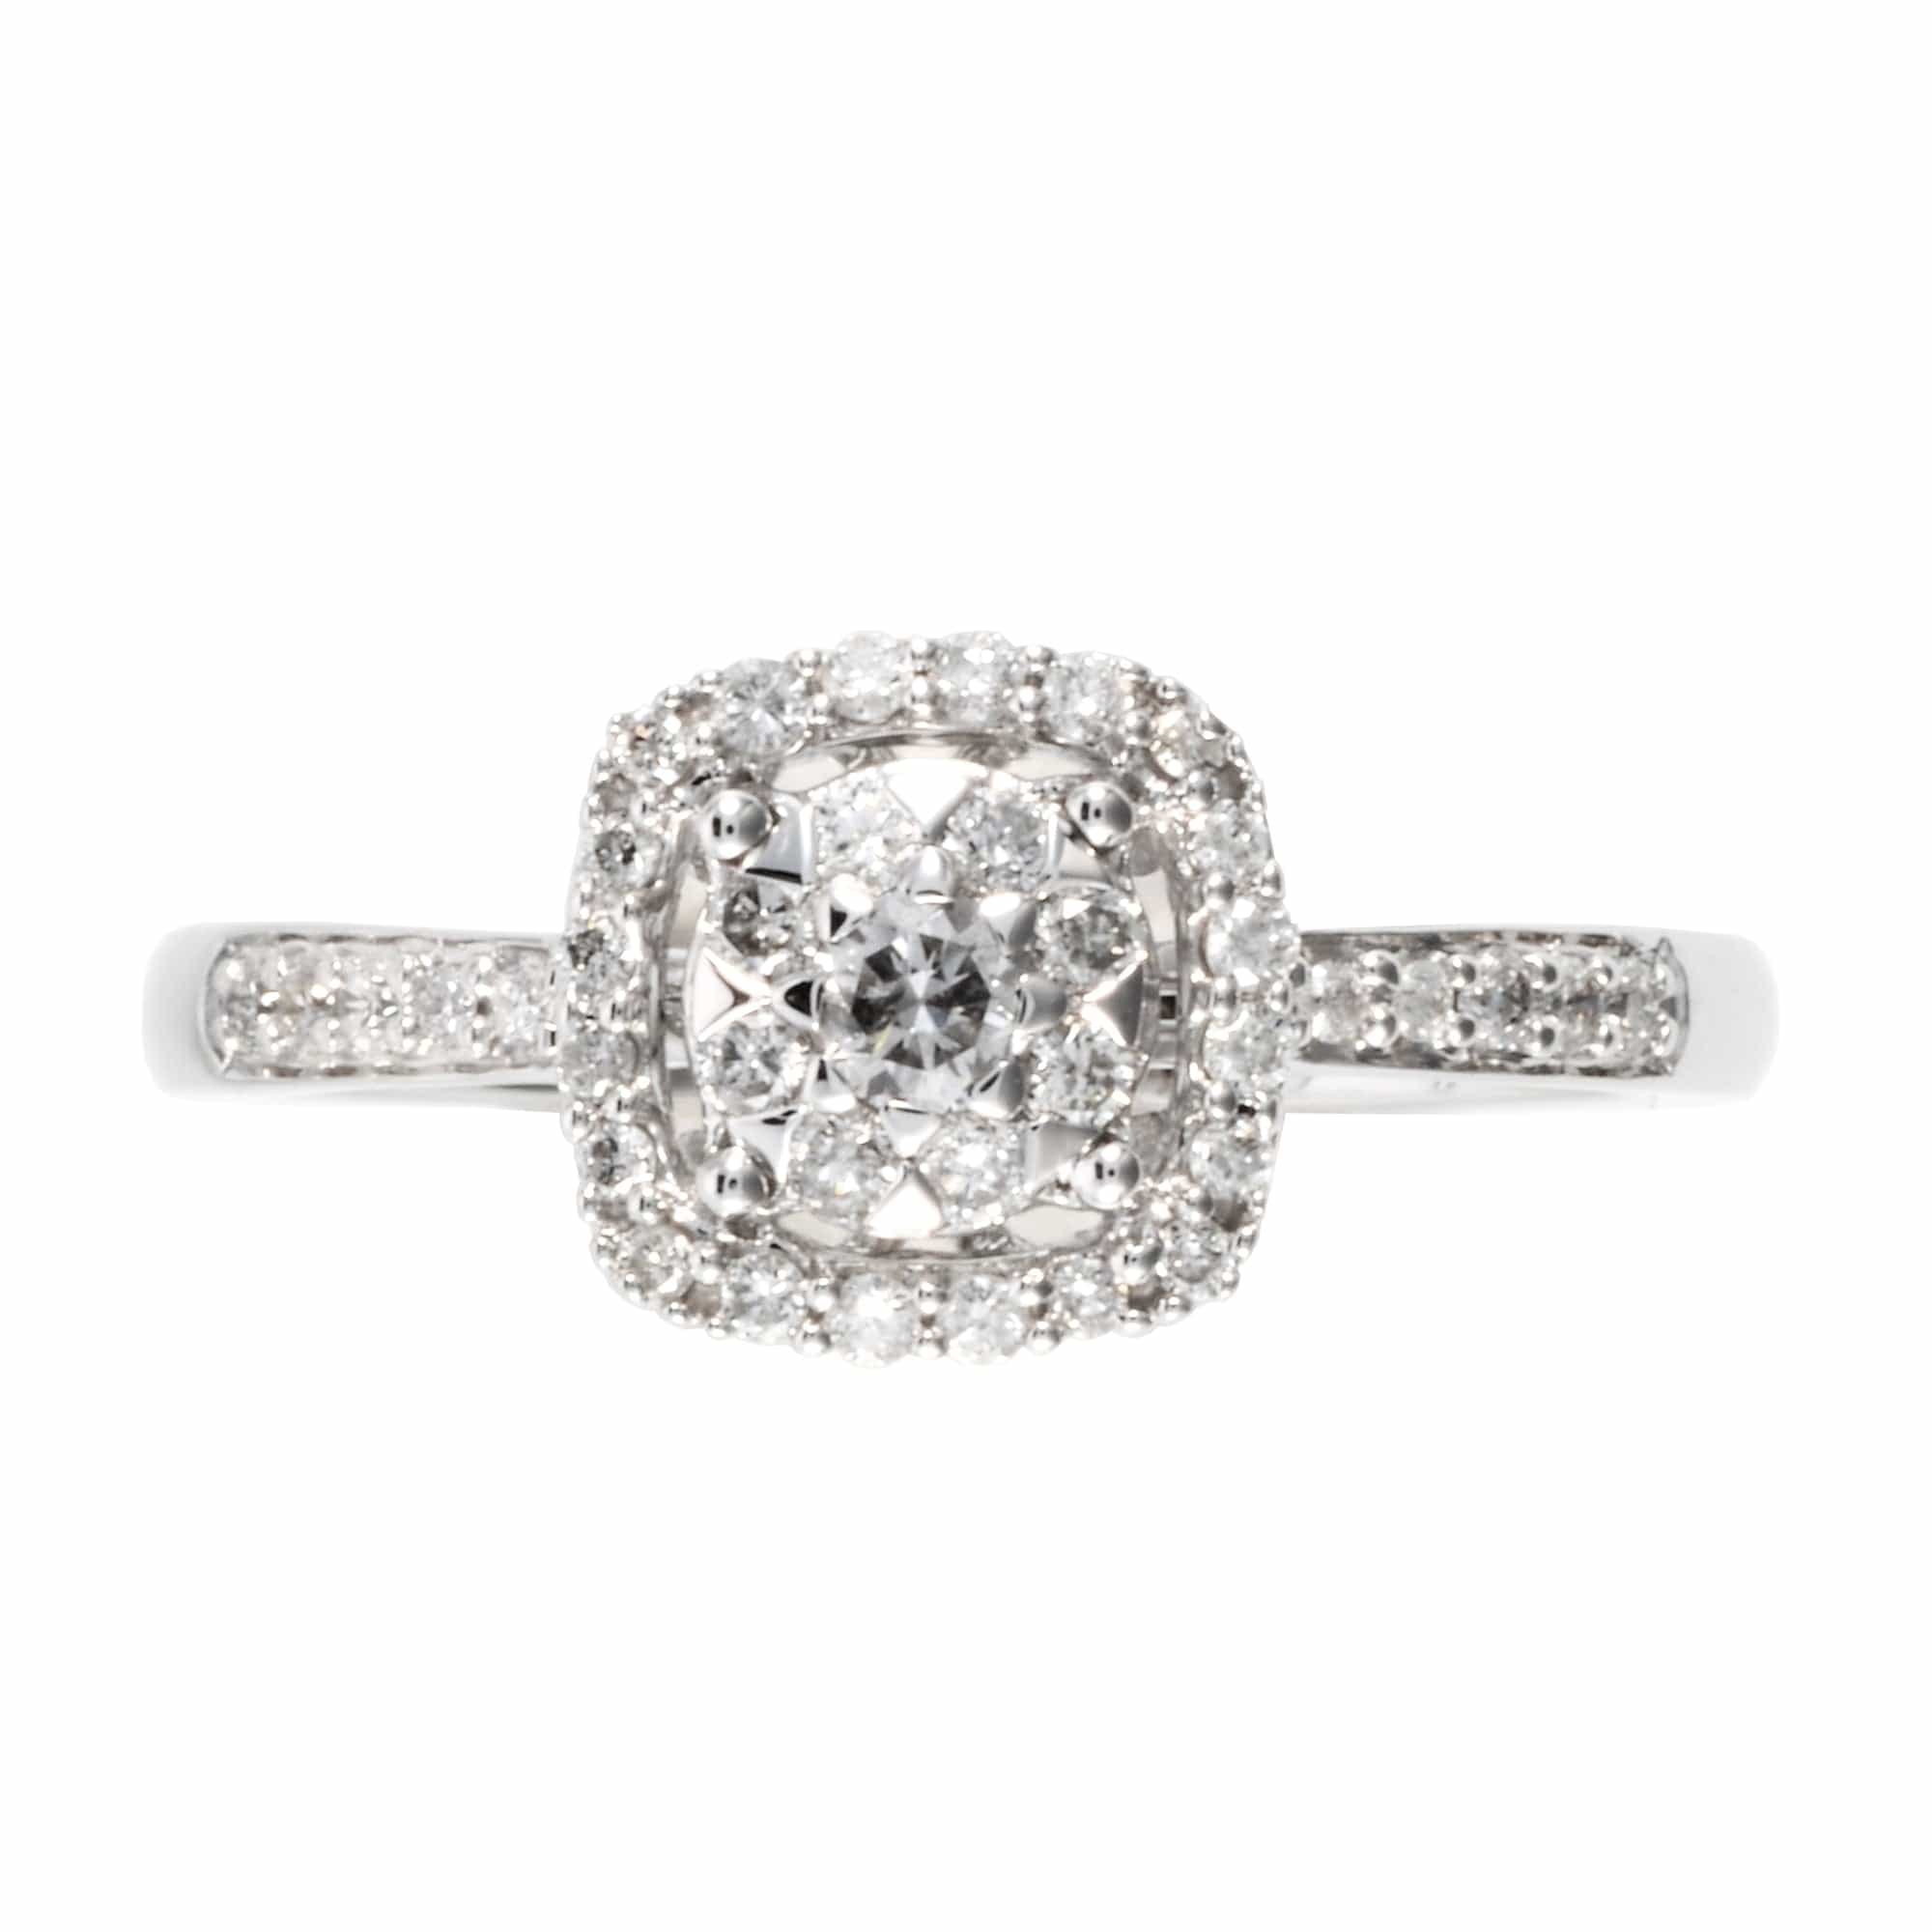 RGLS00027 Classic Round Diamond Halo Cluster Ring in 18ct White Gold 2